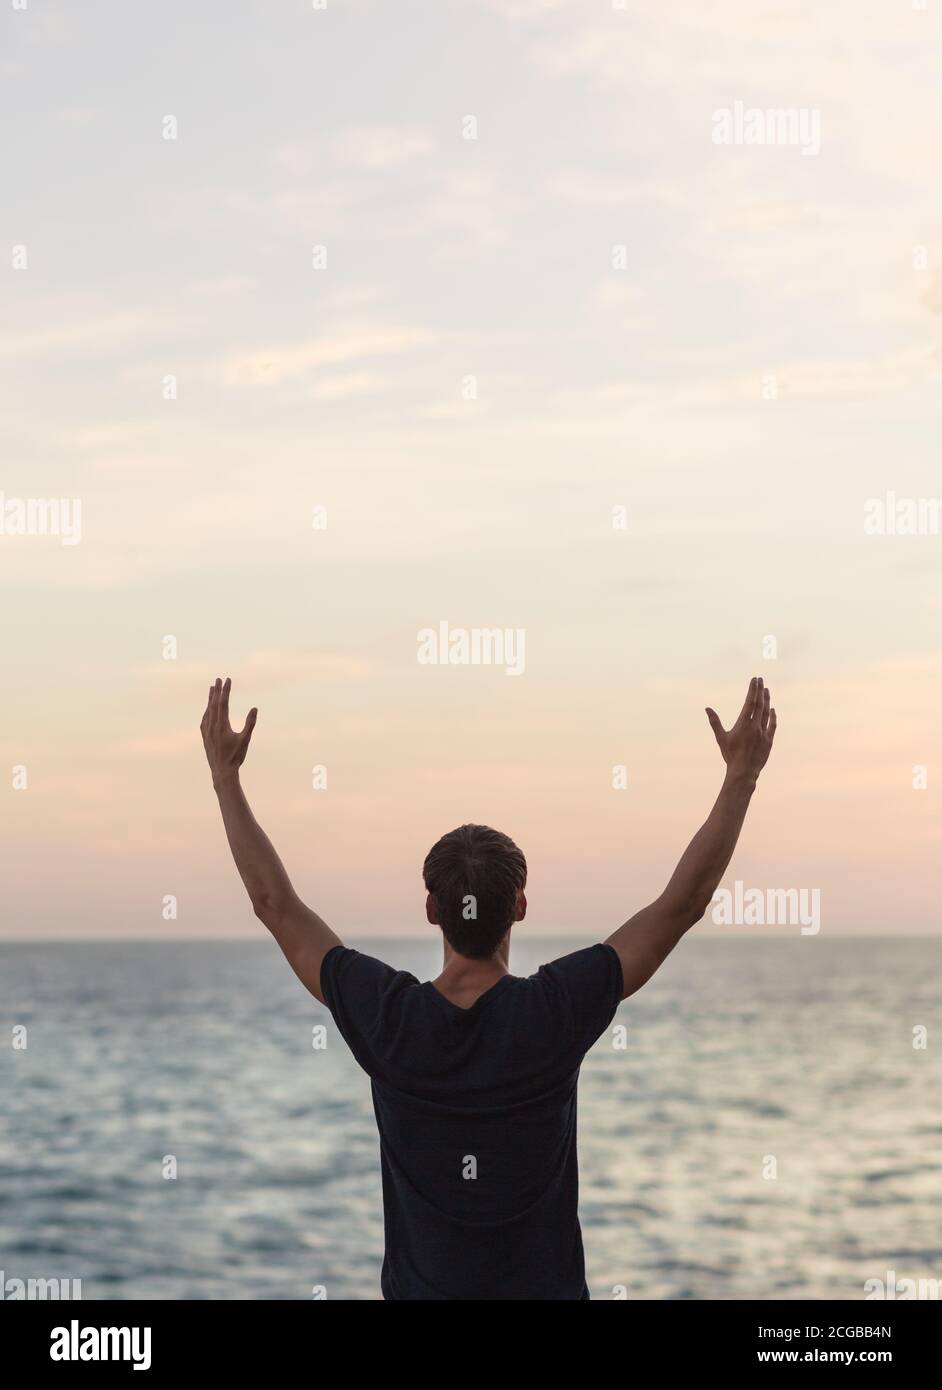 Healthy young man with arms up towards the sky celebrating during a beautiful sunset facing the ocean. Well-being and freedom. Stock Photo